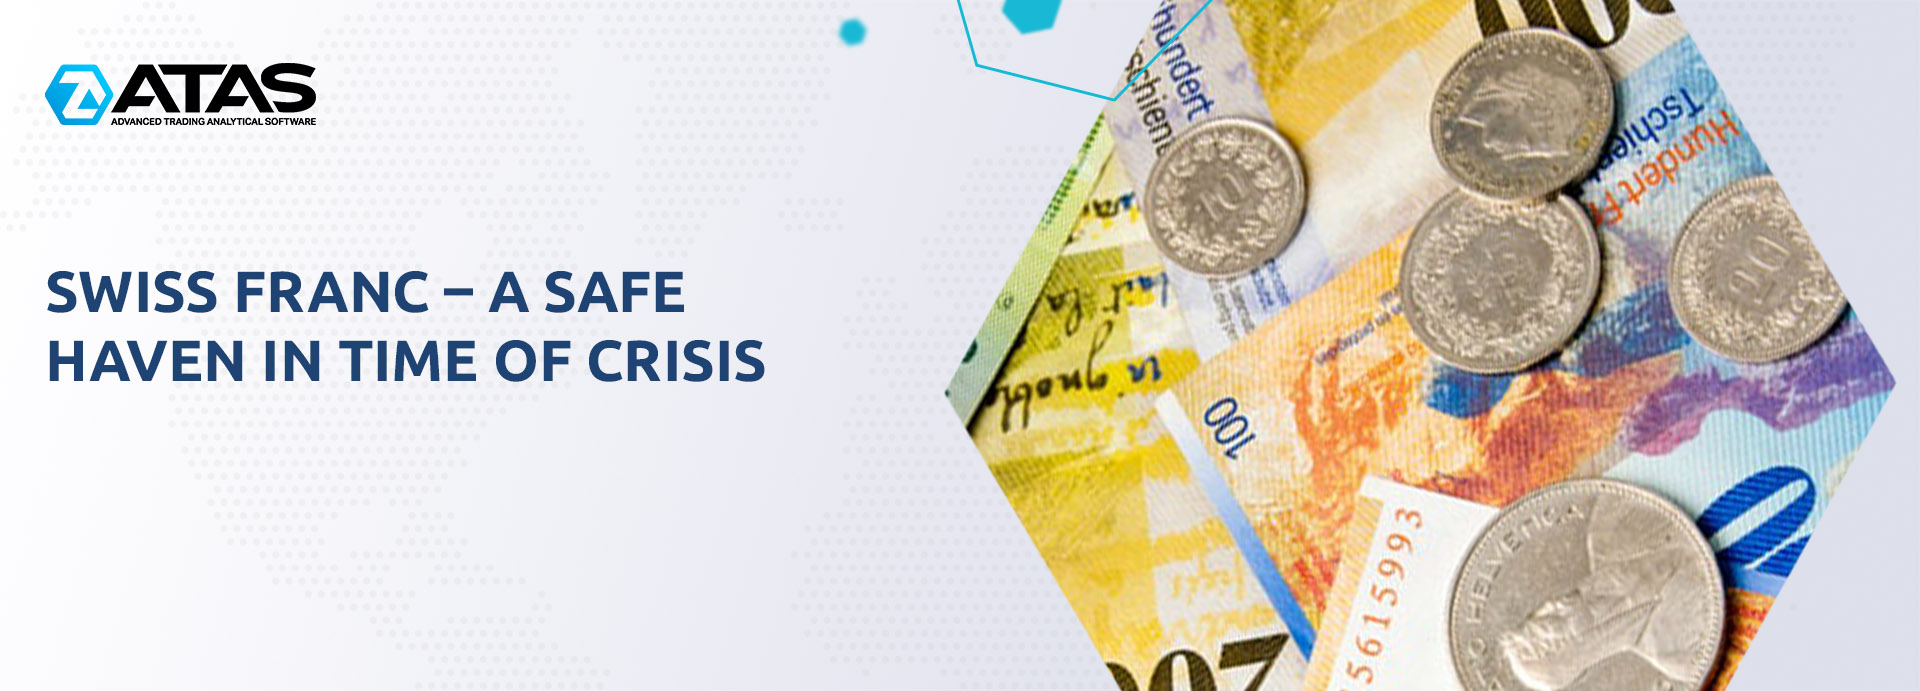 Swiss franc – a safe haven in time of crisis1